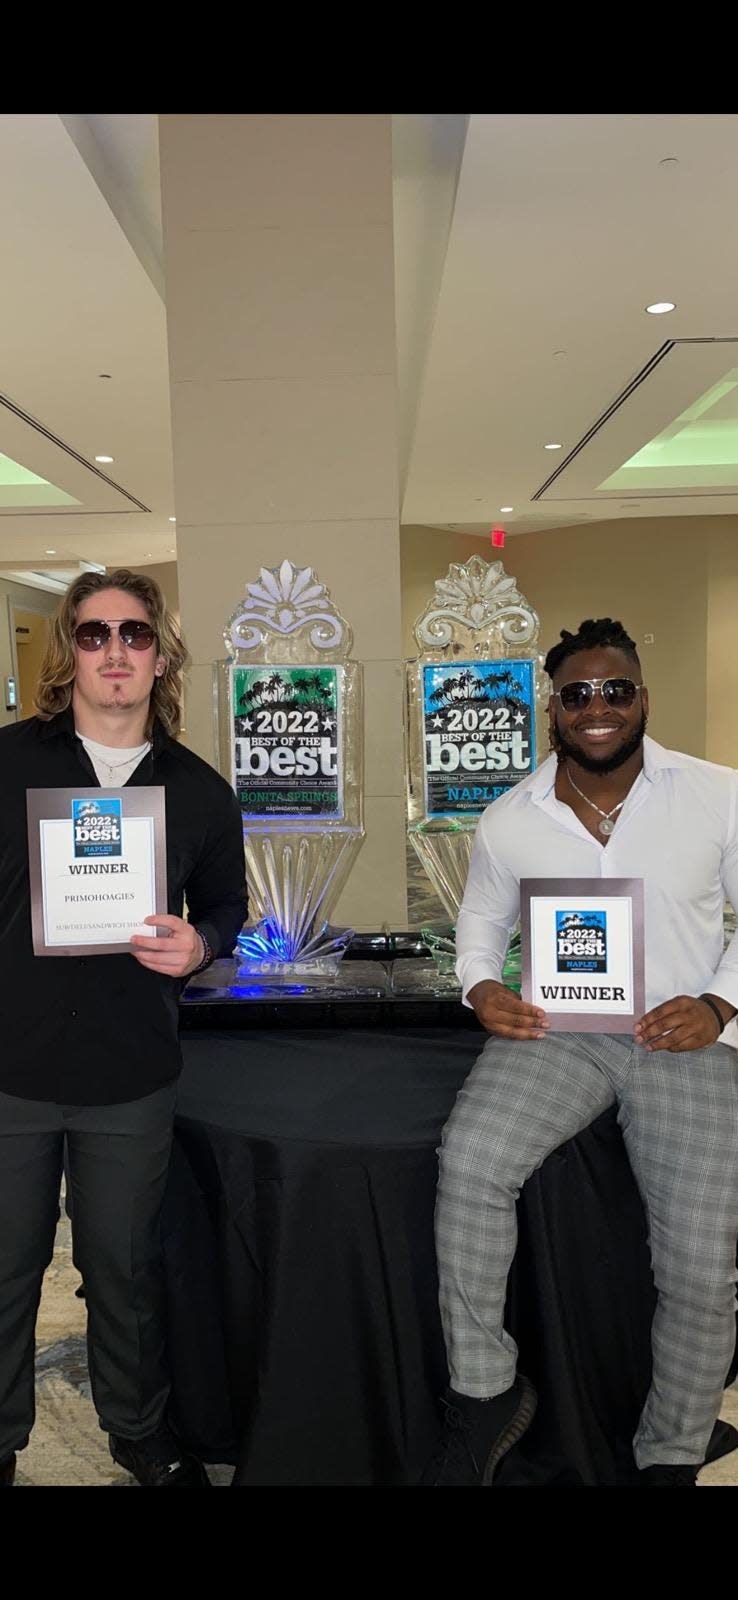 Best of the Best 2022 gala: Winners Kenny Coloma and Justenley Phillippe of PrimoHoagies.